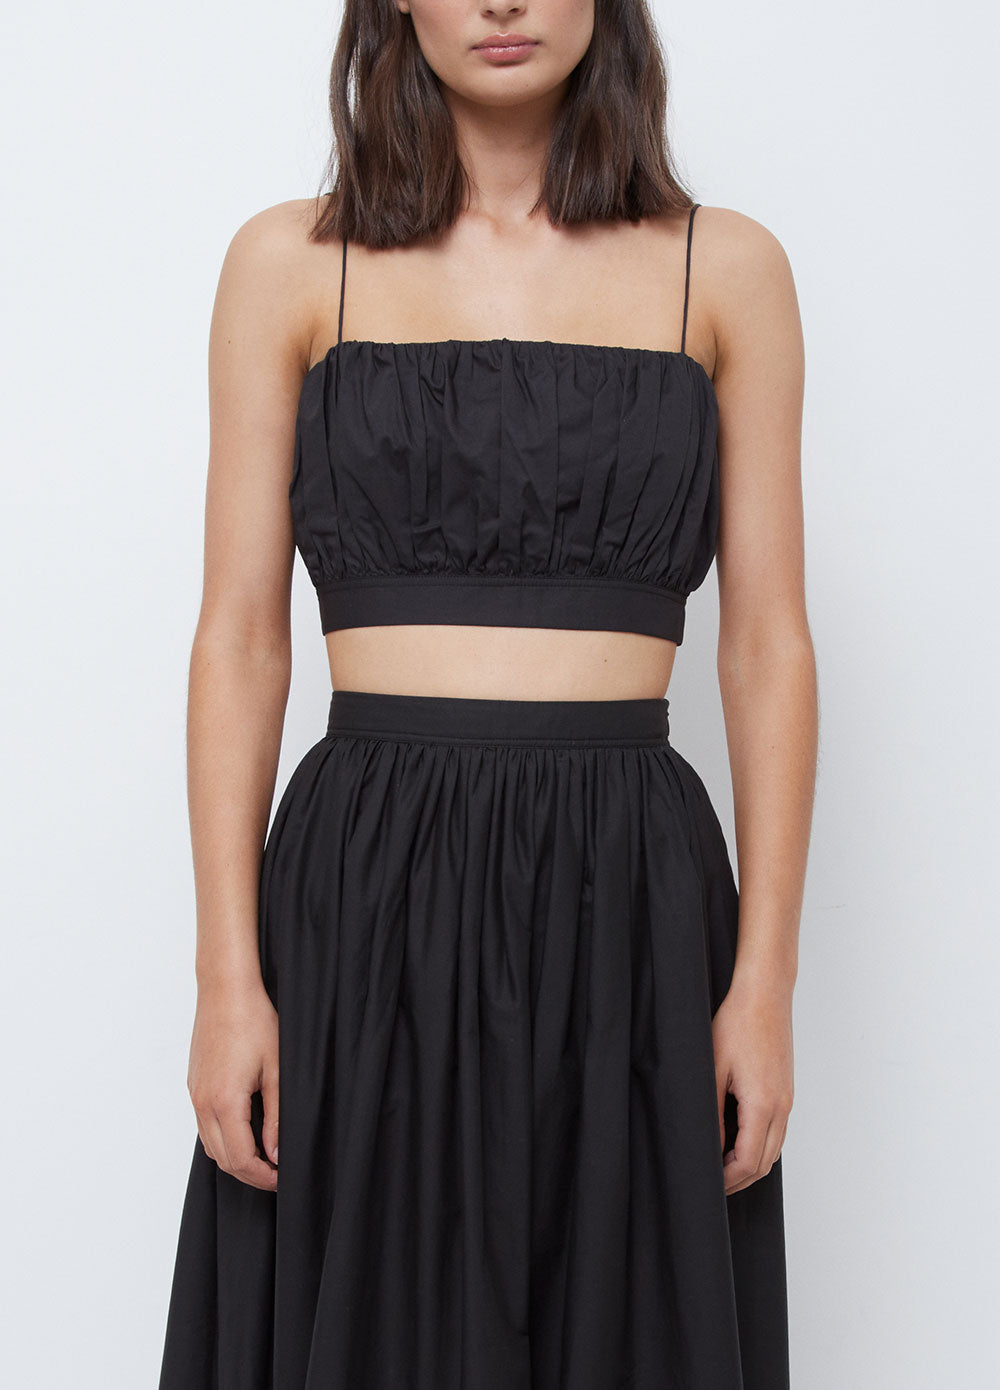 Ruched Camisole